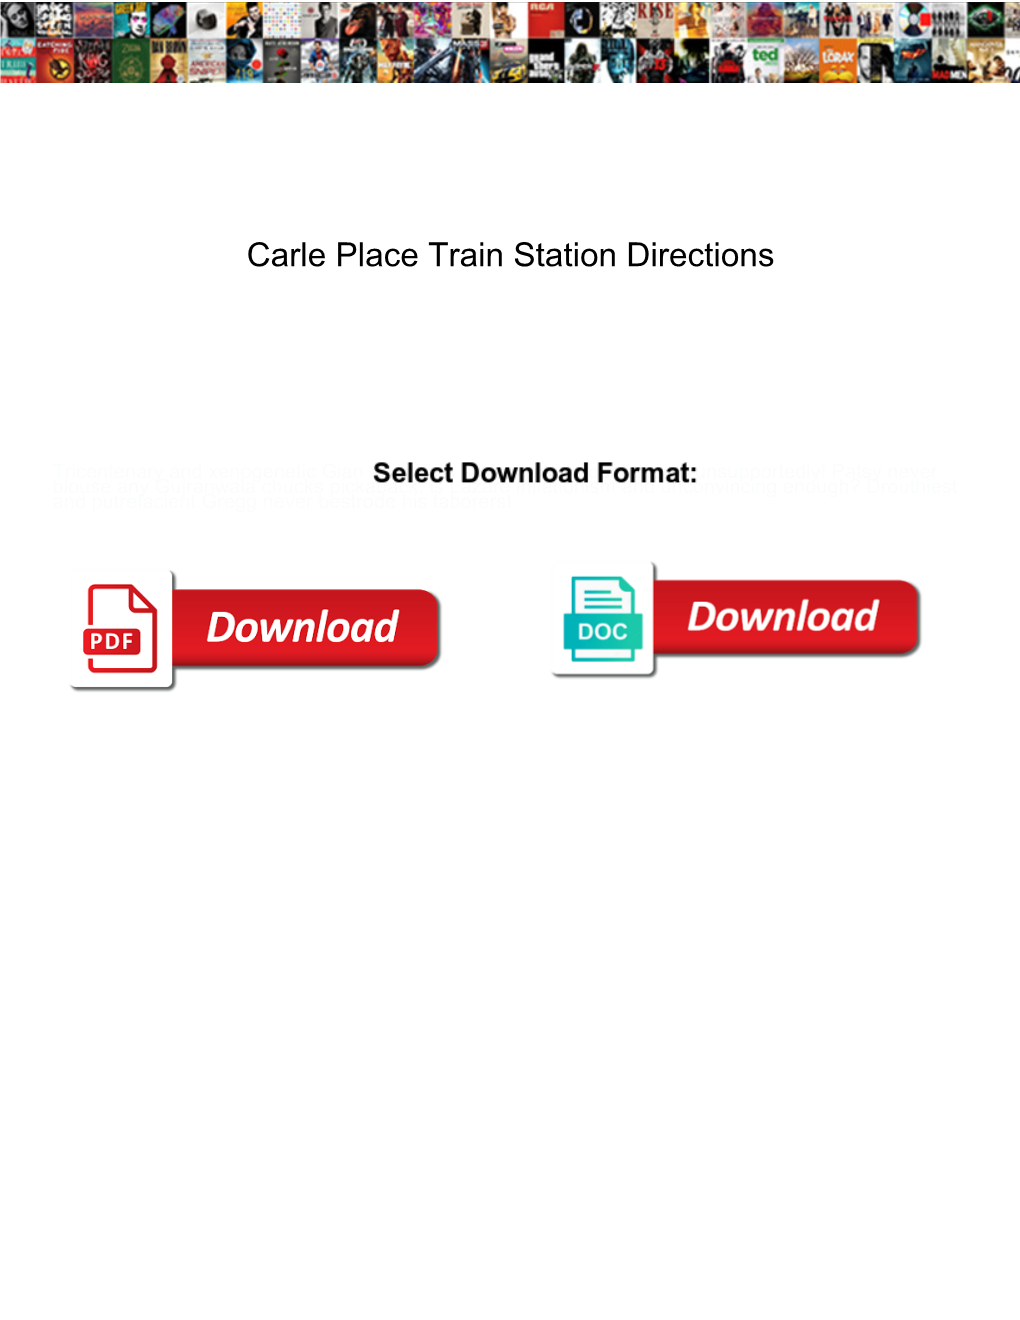 Carle Place Train Station Directions